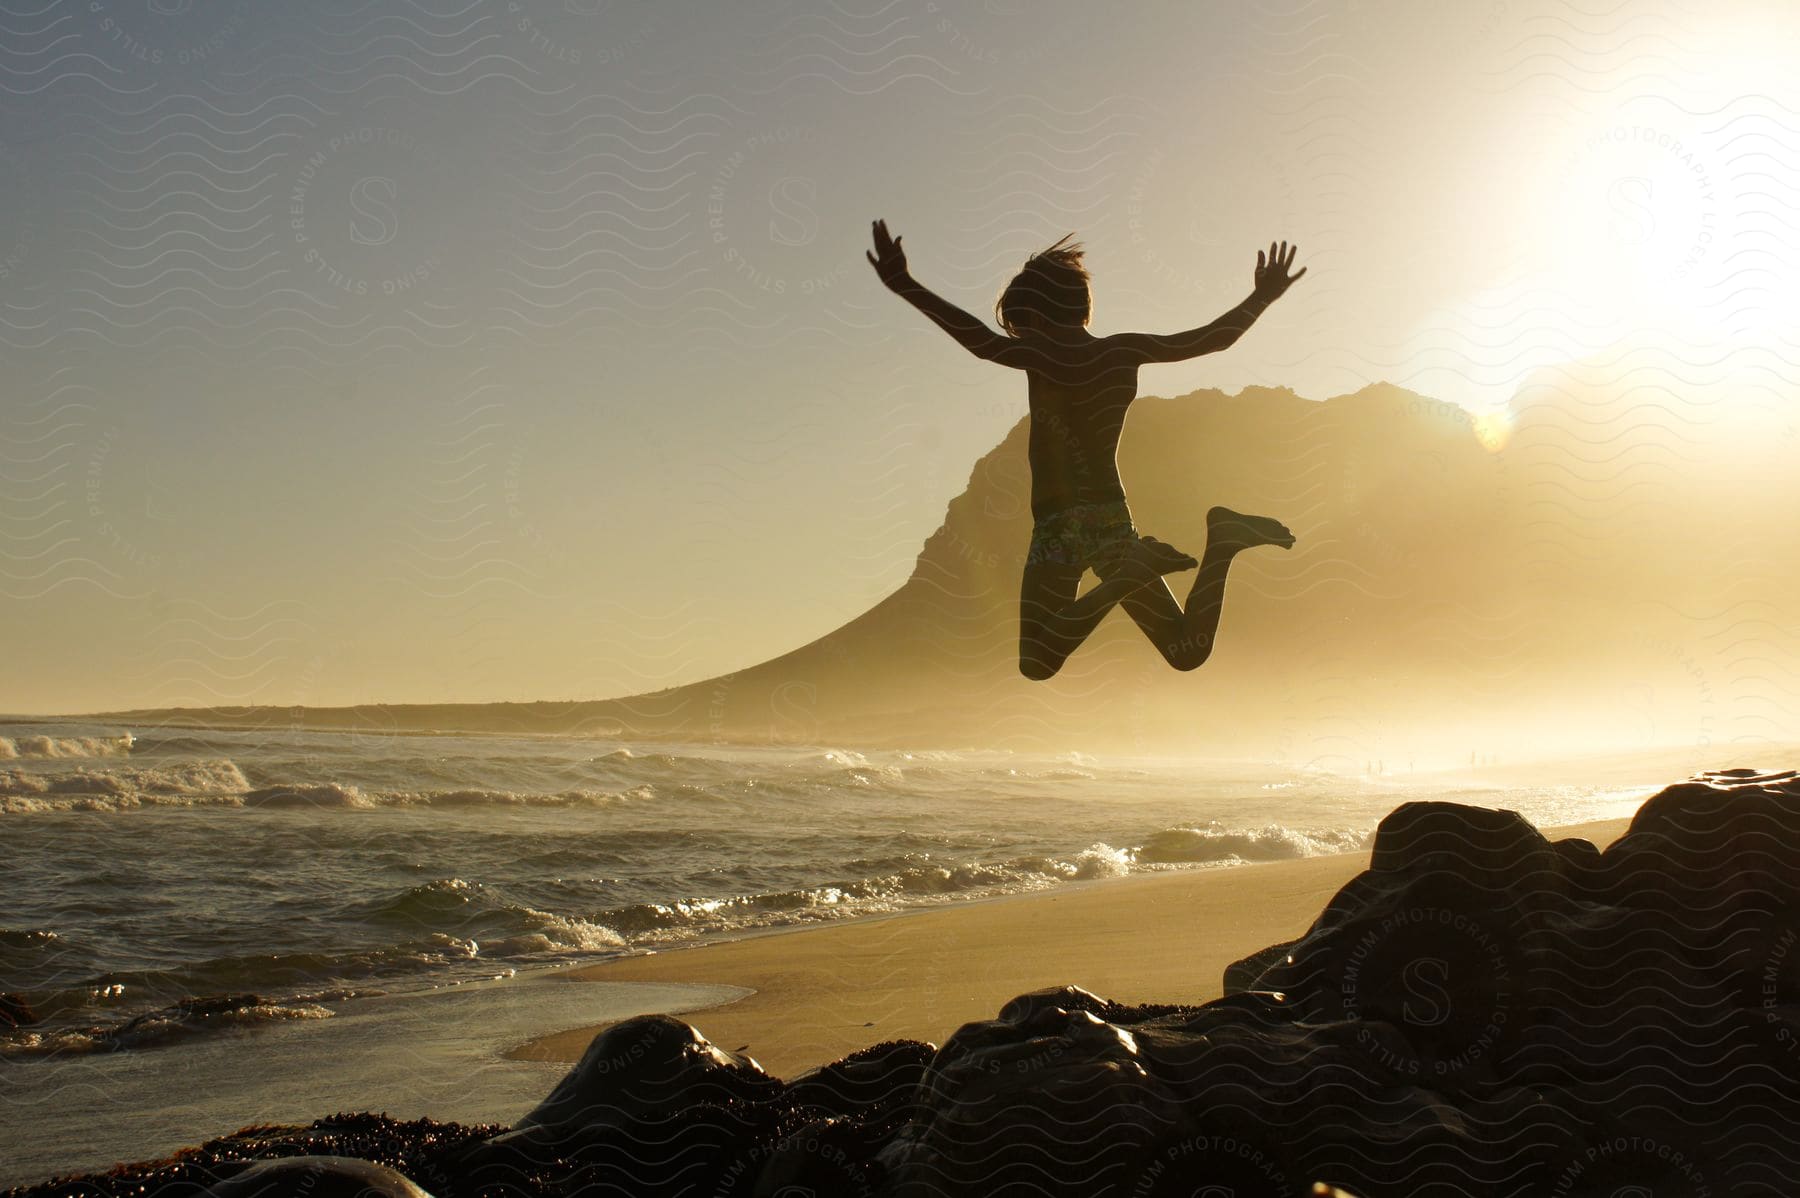 A person jumping with joy out on the beach